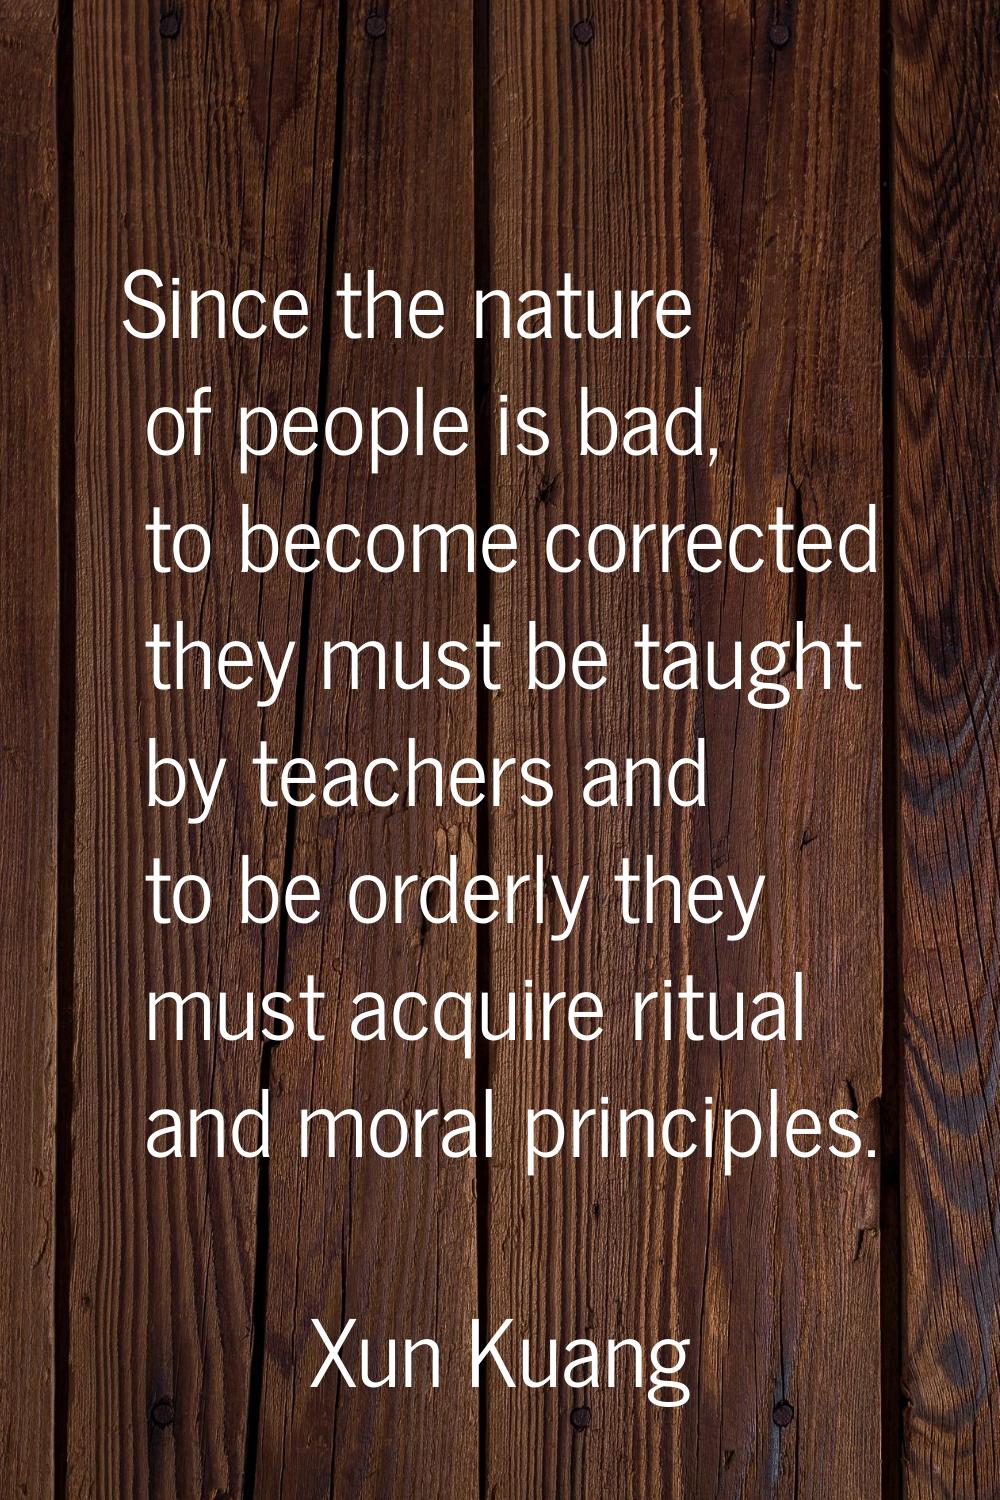 Since the nature of people is bad, to become corrected they must be taught by teachers and to be or